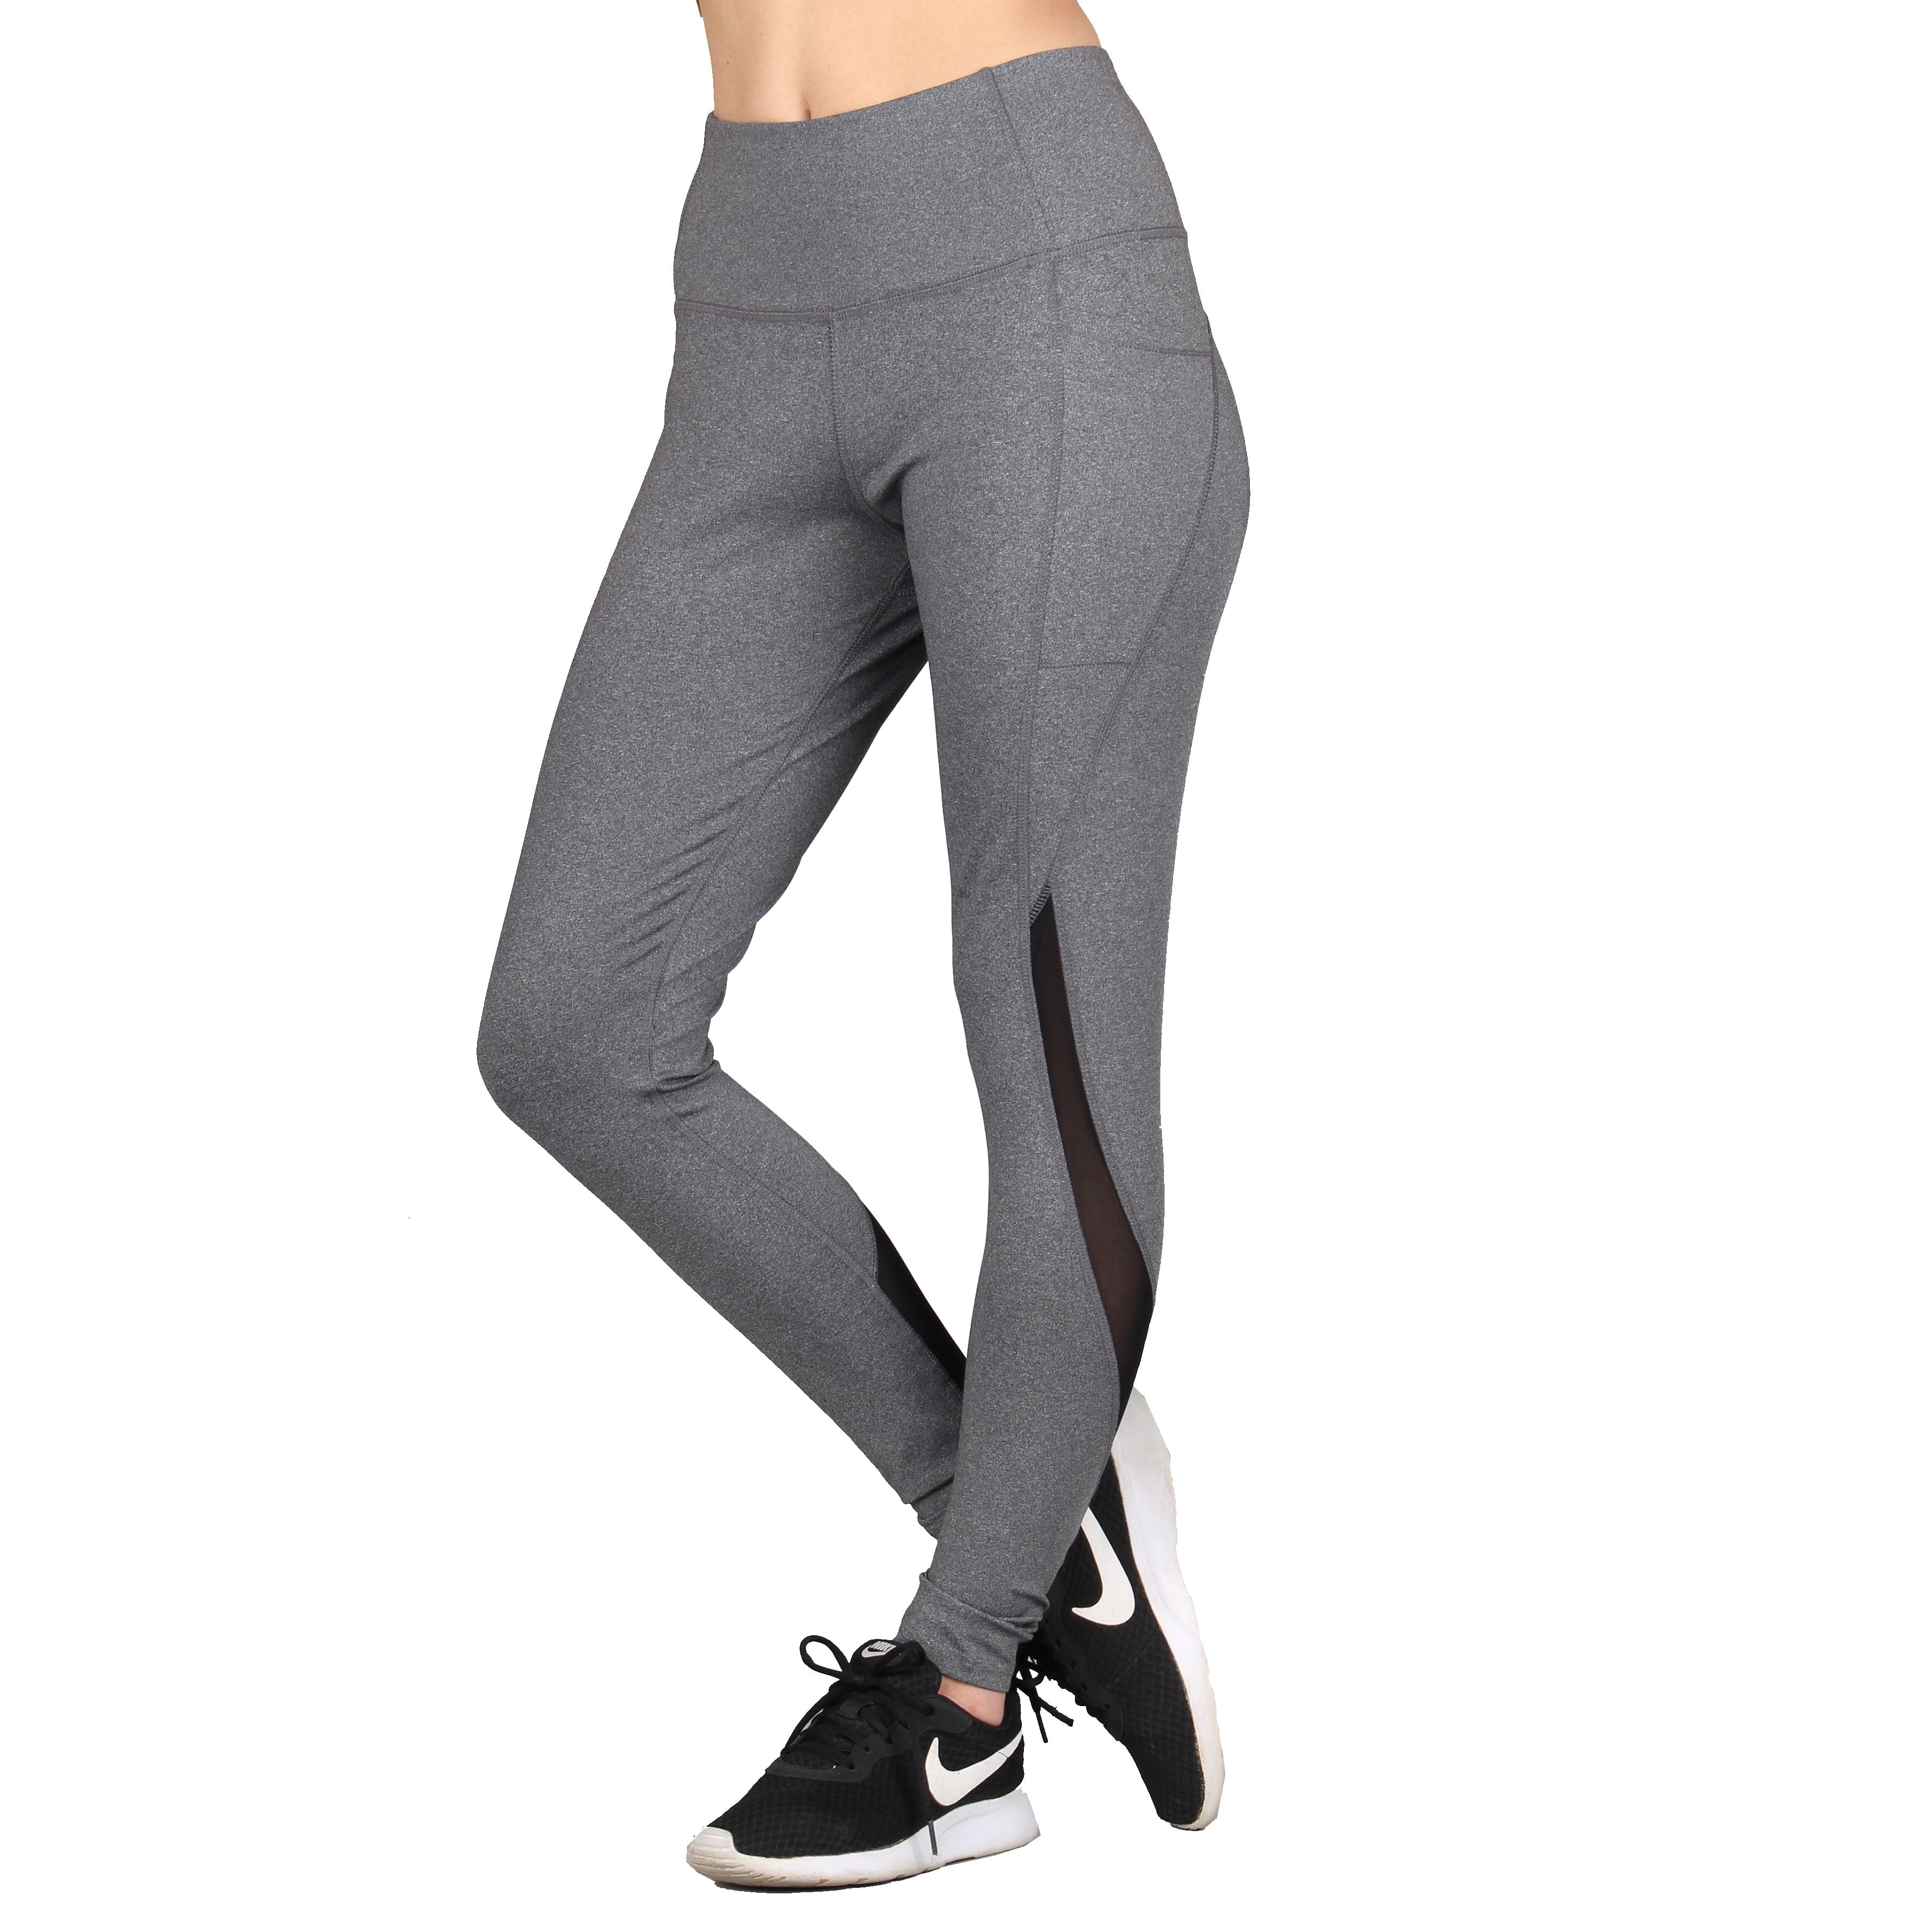 Up To 70% Off on Men's Compression Pants Athle... | Groupon Goods